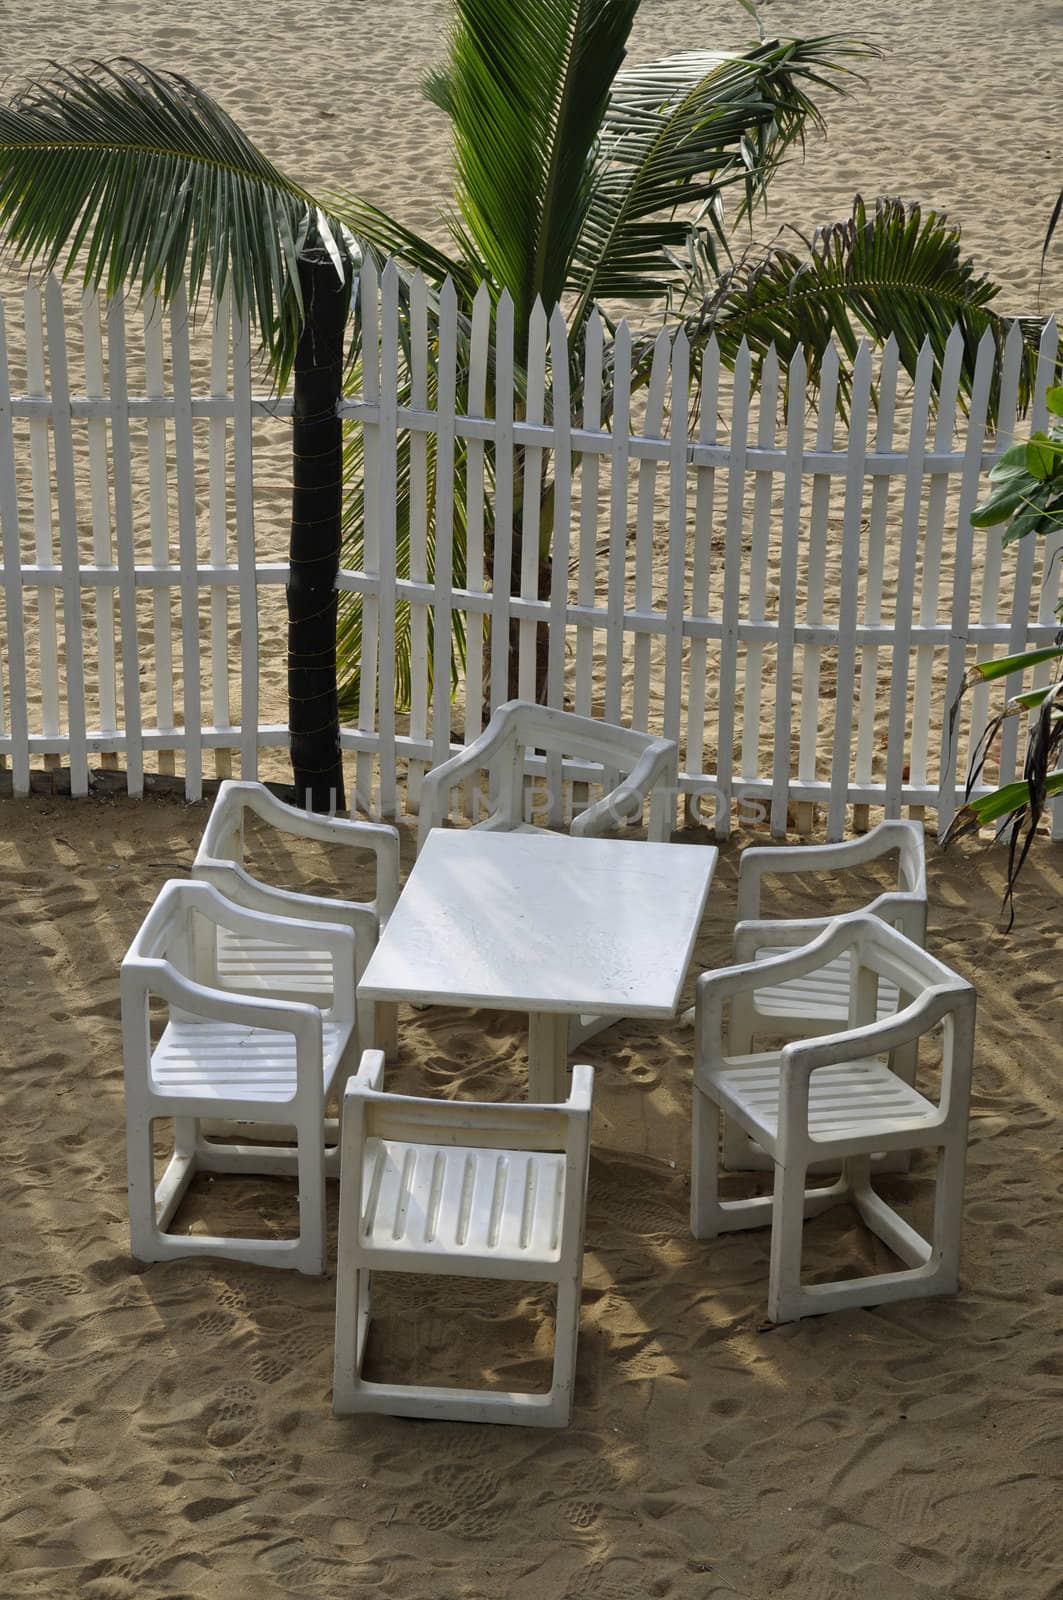 The perfect seating for a little gathering at the beach in Colombo, Sri Lanka